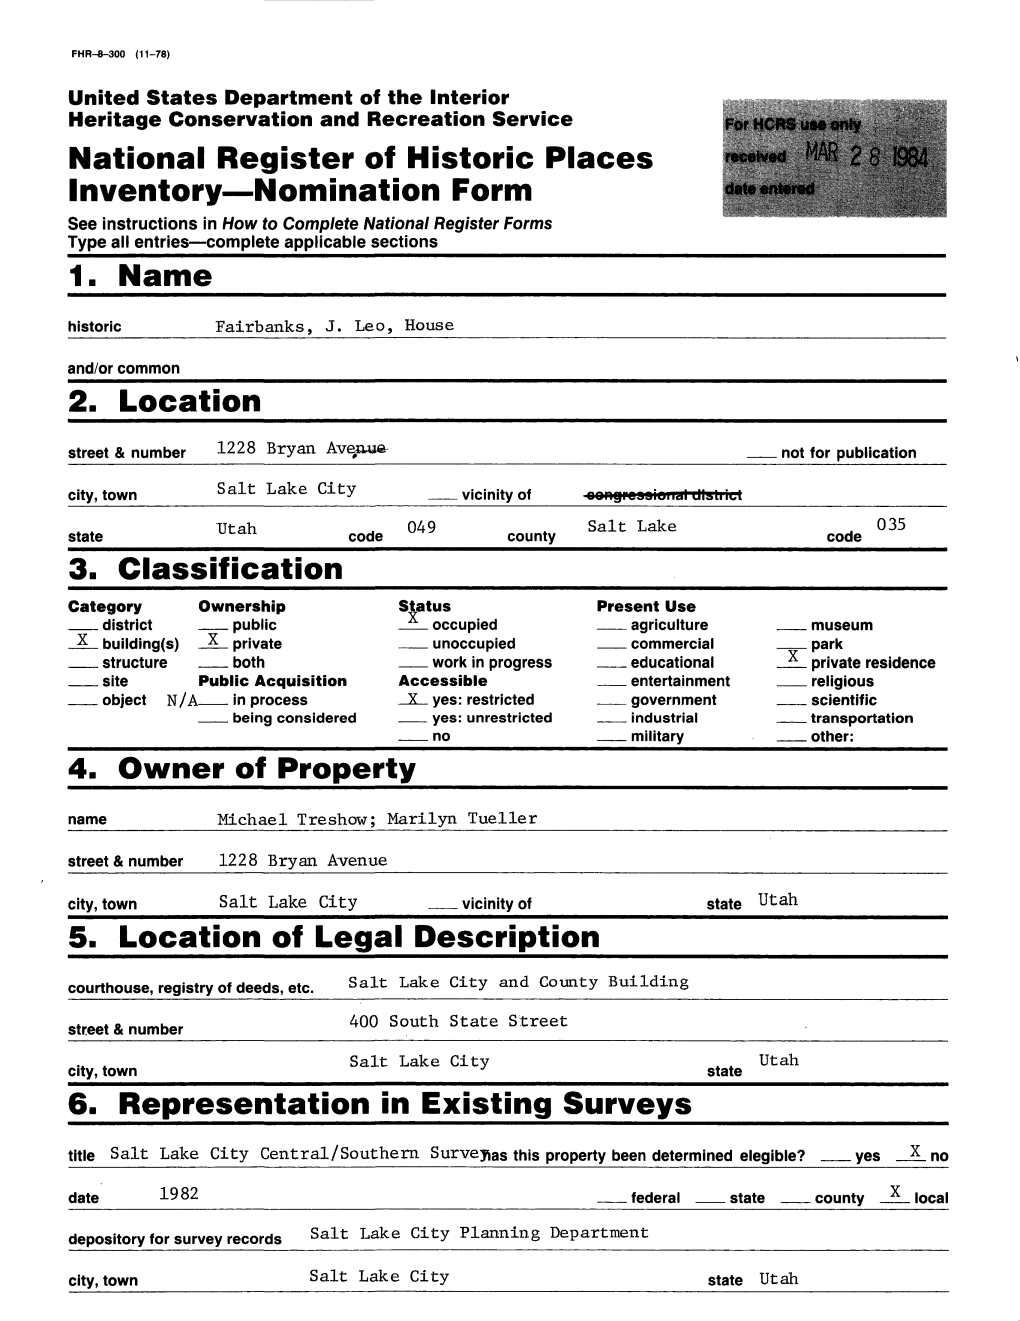 National Register of Historic Places Inventory Nomination Form 1. Name 2. Location 5. Location of Legal Description 6. Represent